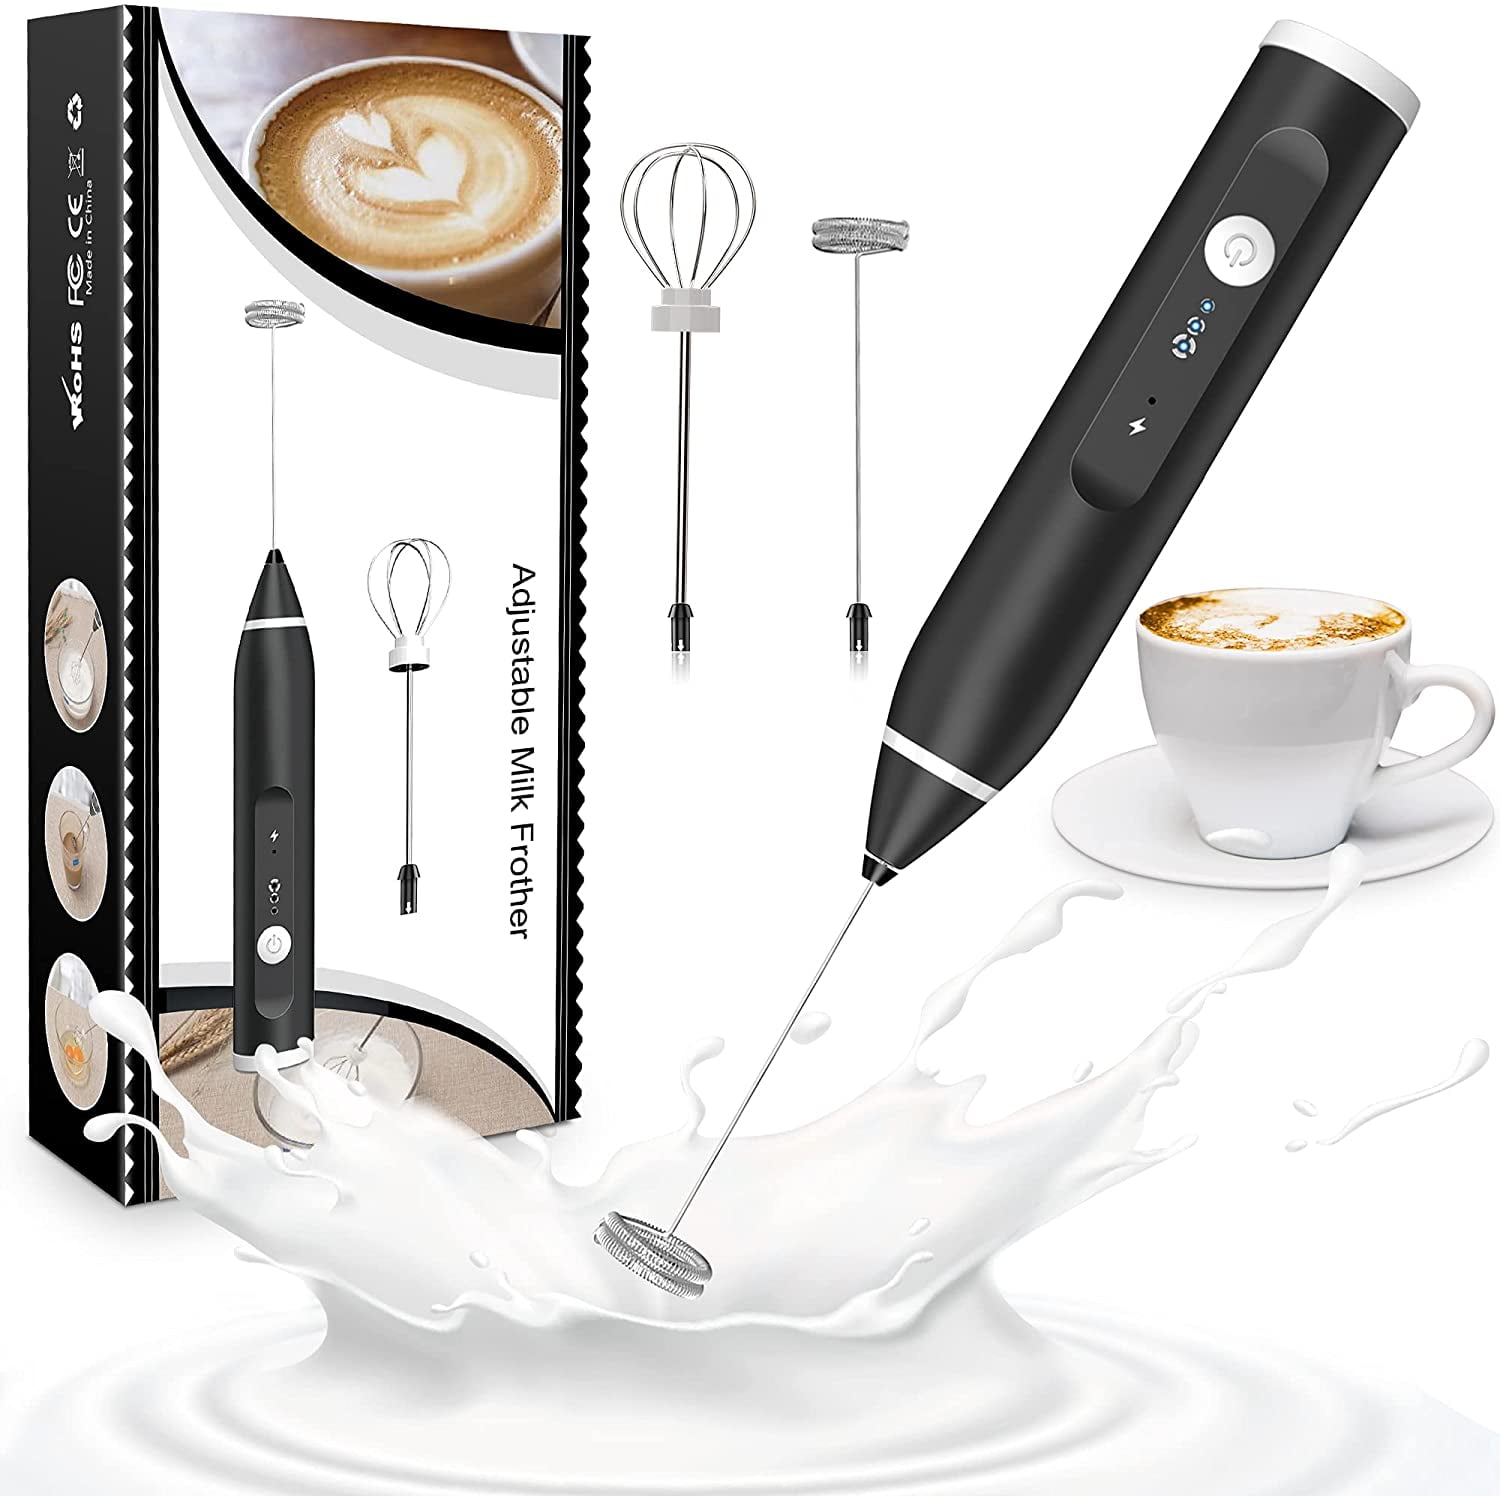 Milk Frother Handheld Electric Foam Maker USB Rechargeable Coffee Frother  with 3 Stainless whisks, 3 Speed Adjustable Mini Blender for Coffee, Latte